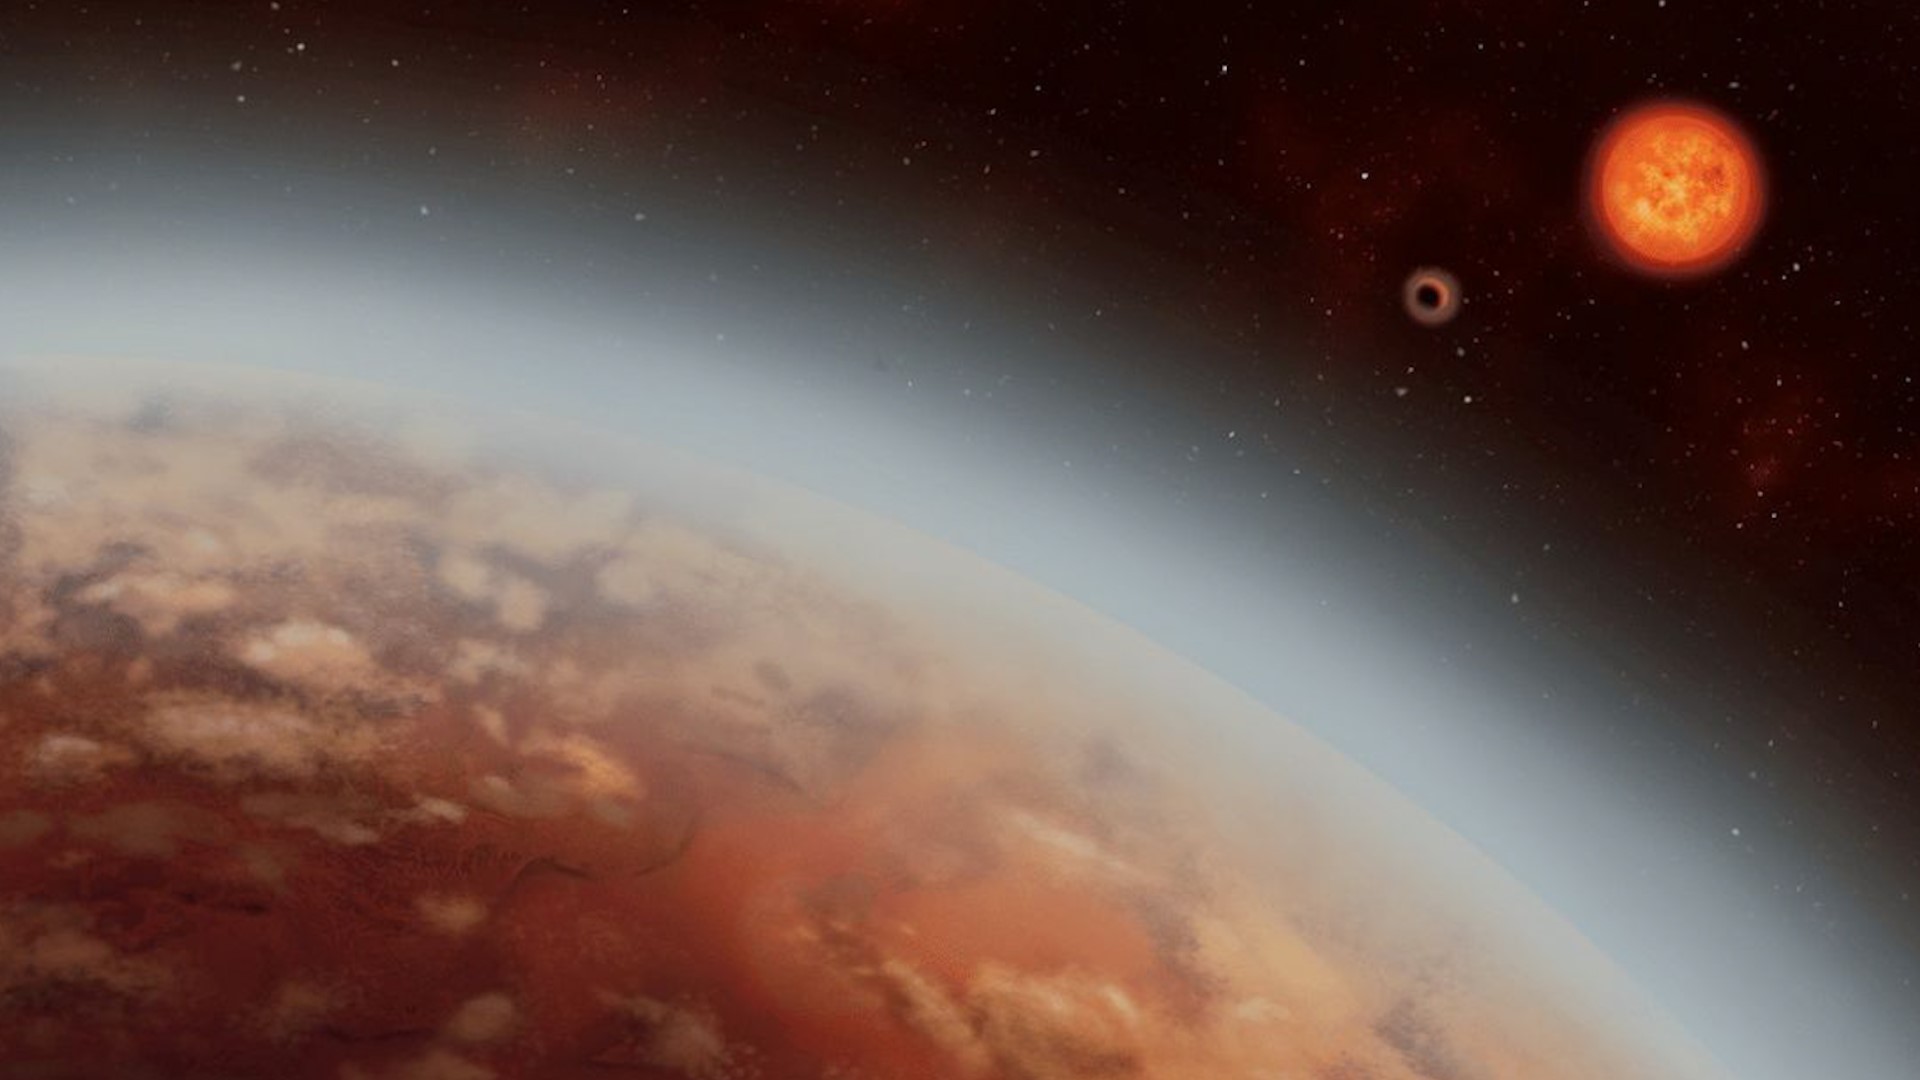 Water vapor, and maybe even rain, has been found in the atmosphere of a super-Earth within the habitable zone - in a world's first. The research was detailed by University College London and University of Montreal researchers in Nature Astronomy and arXiv.